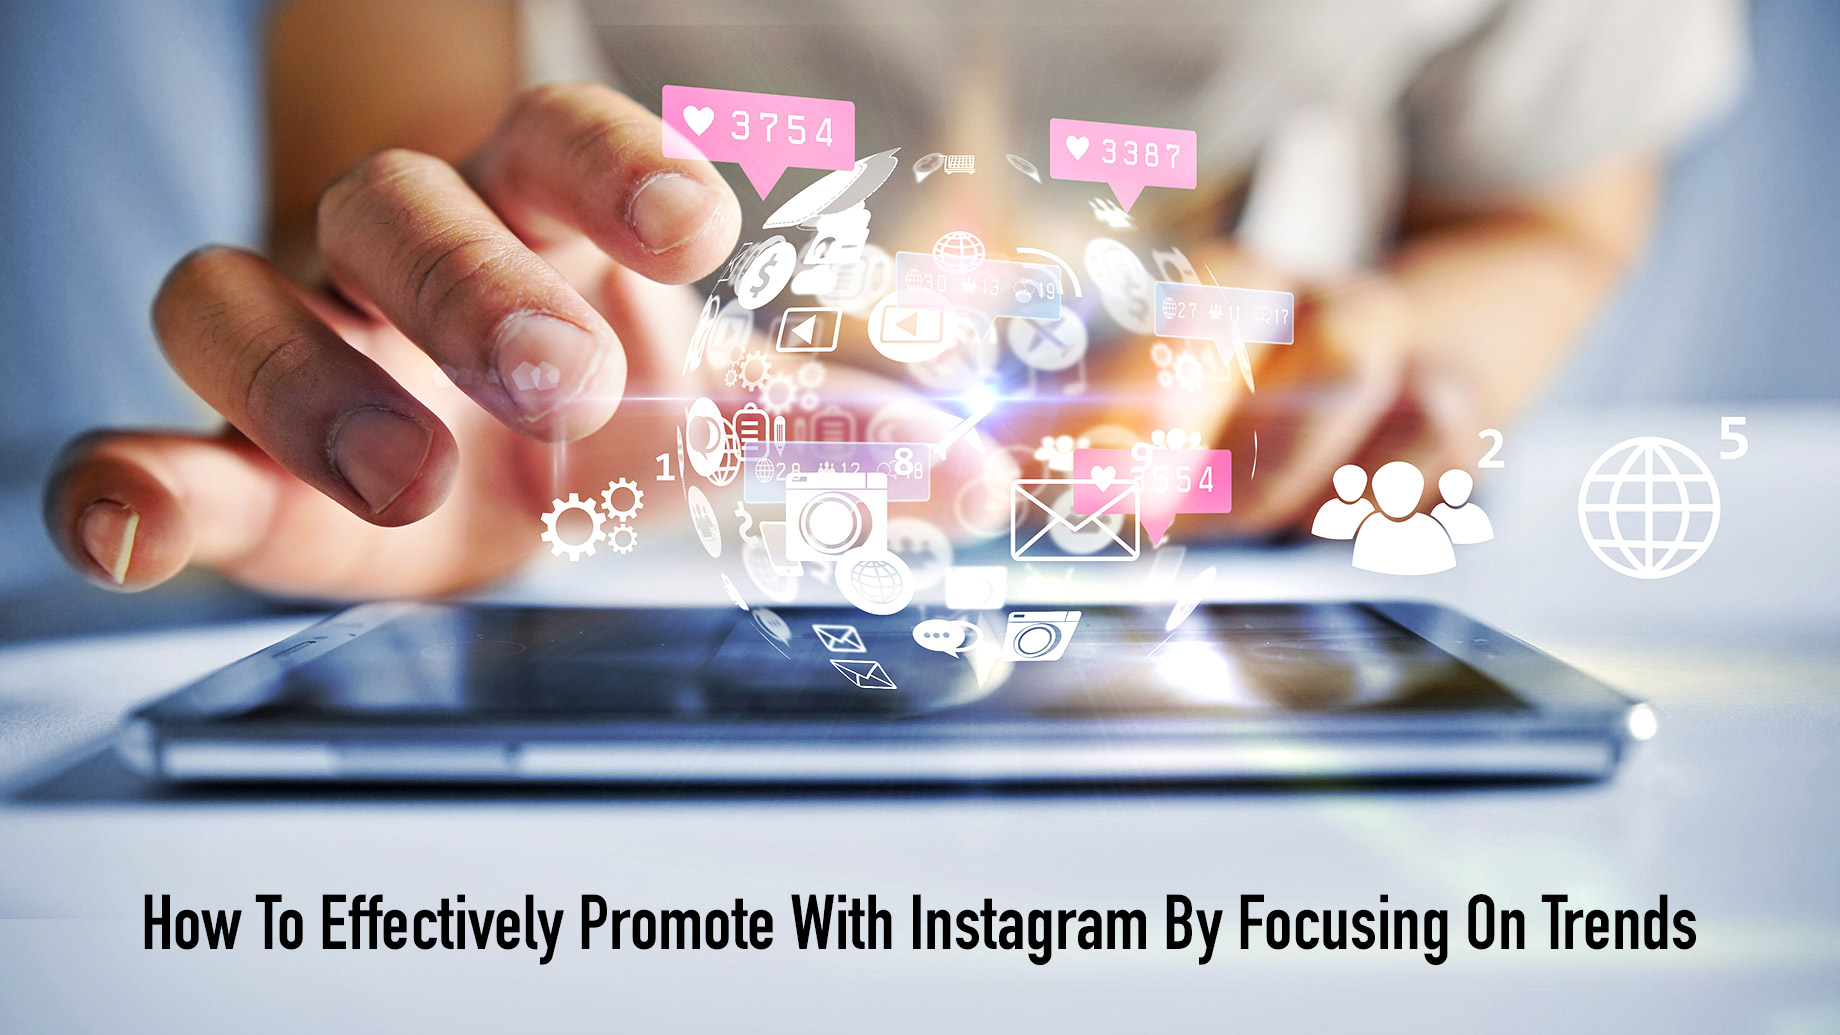 How To Effectively Promote With Instagram By Focusing On Trends